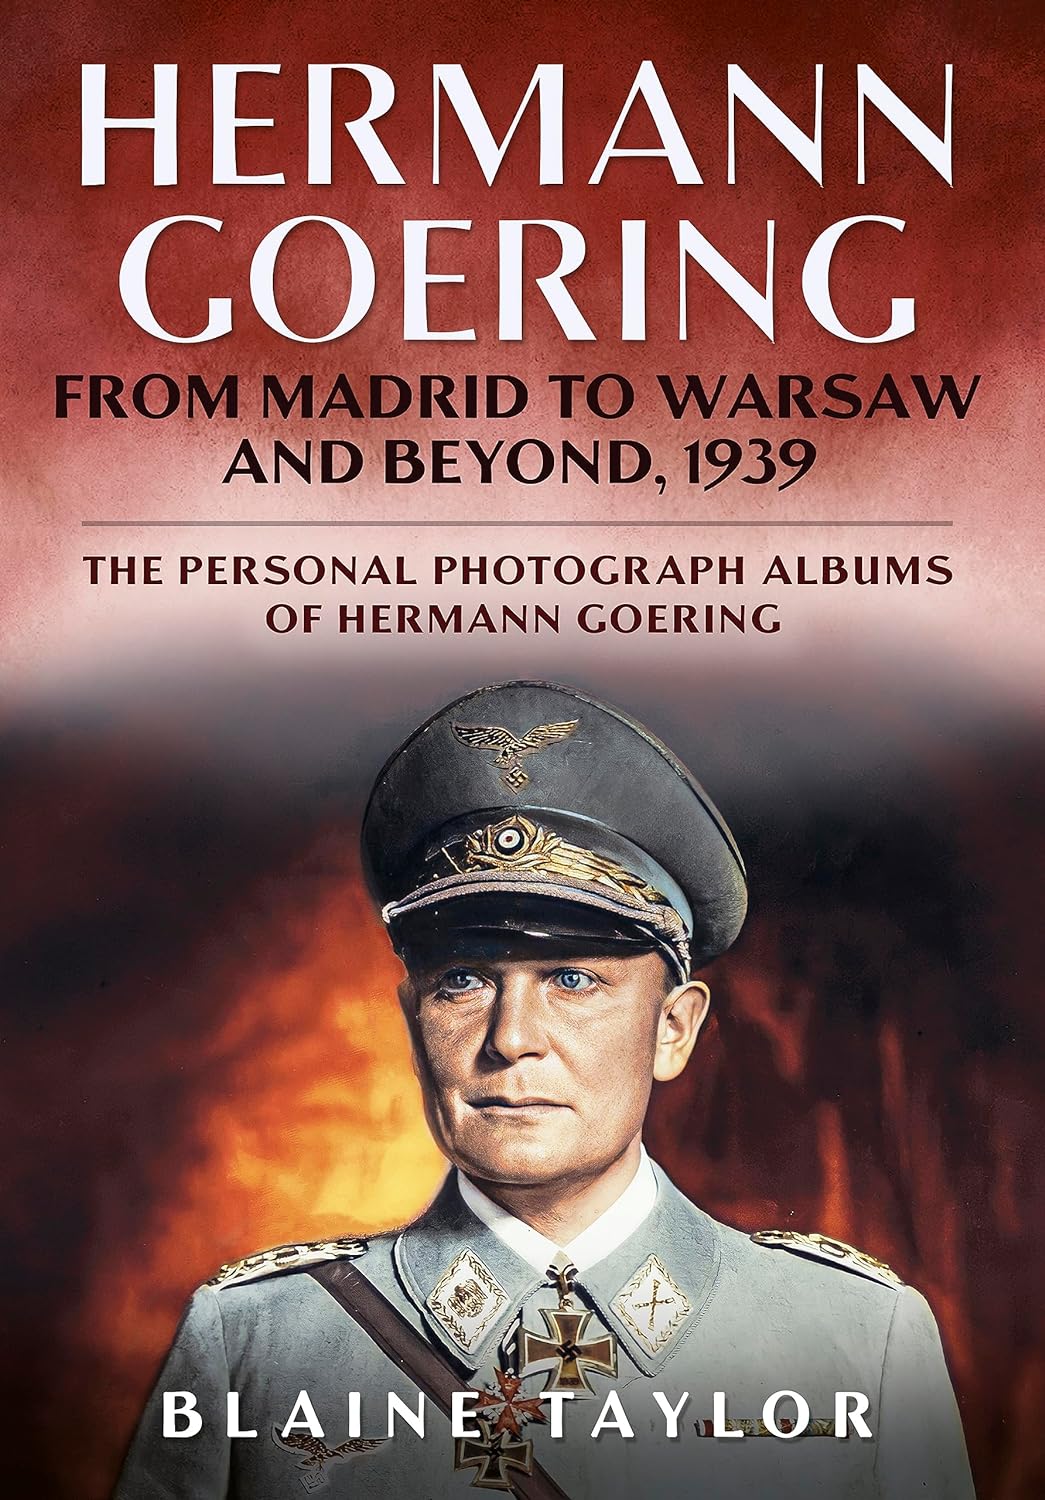 Hermann Goering: From Madrid to Warsaw and Beyond, 1939